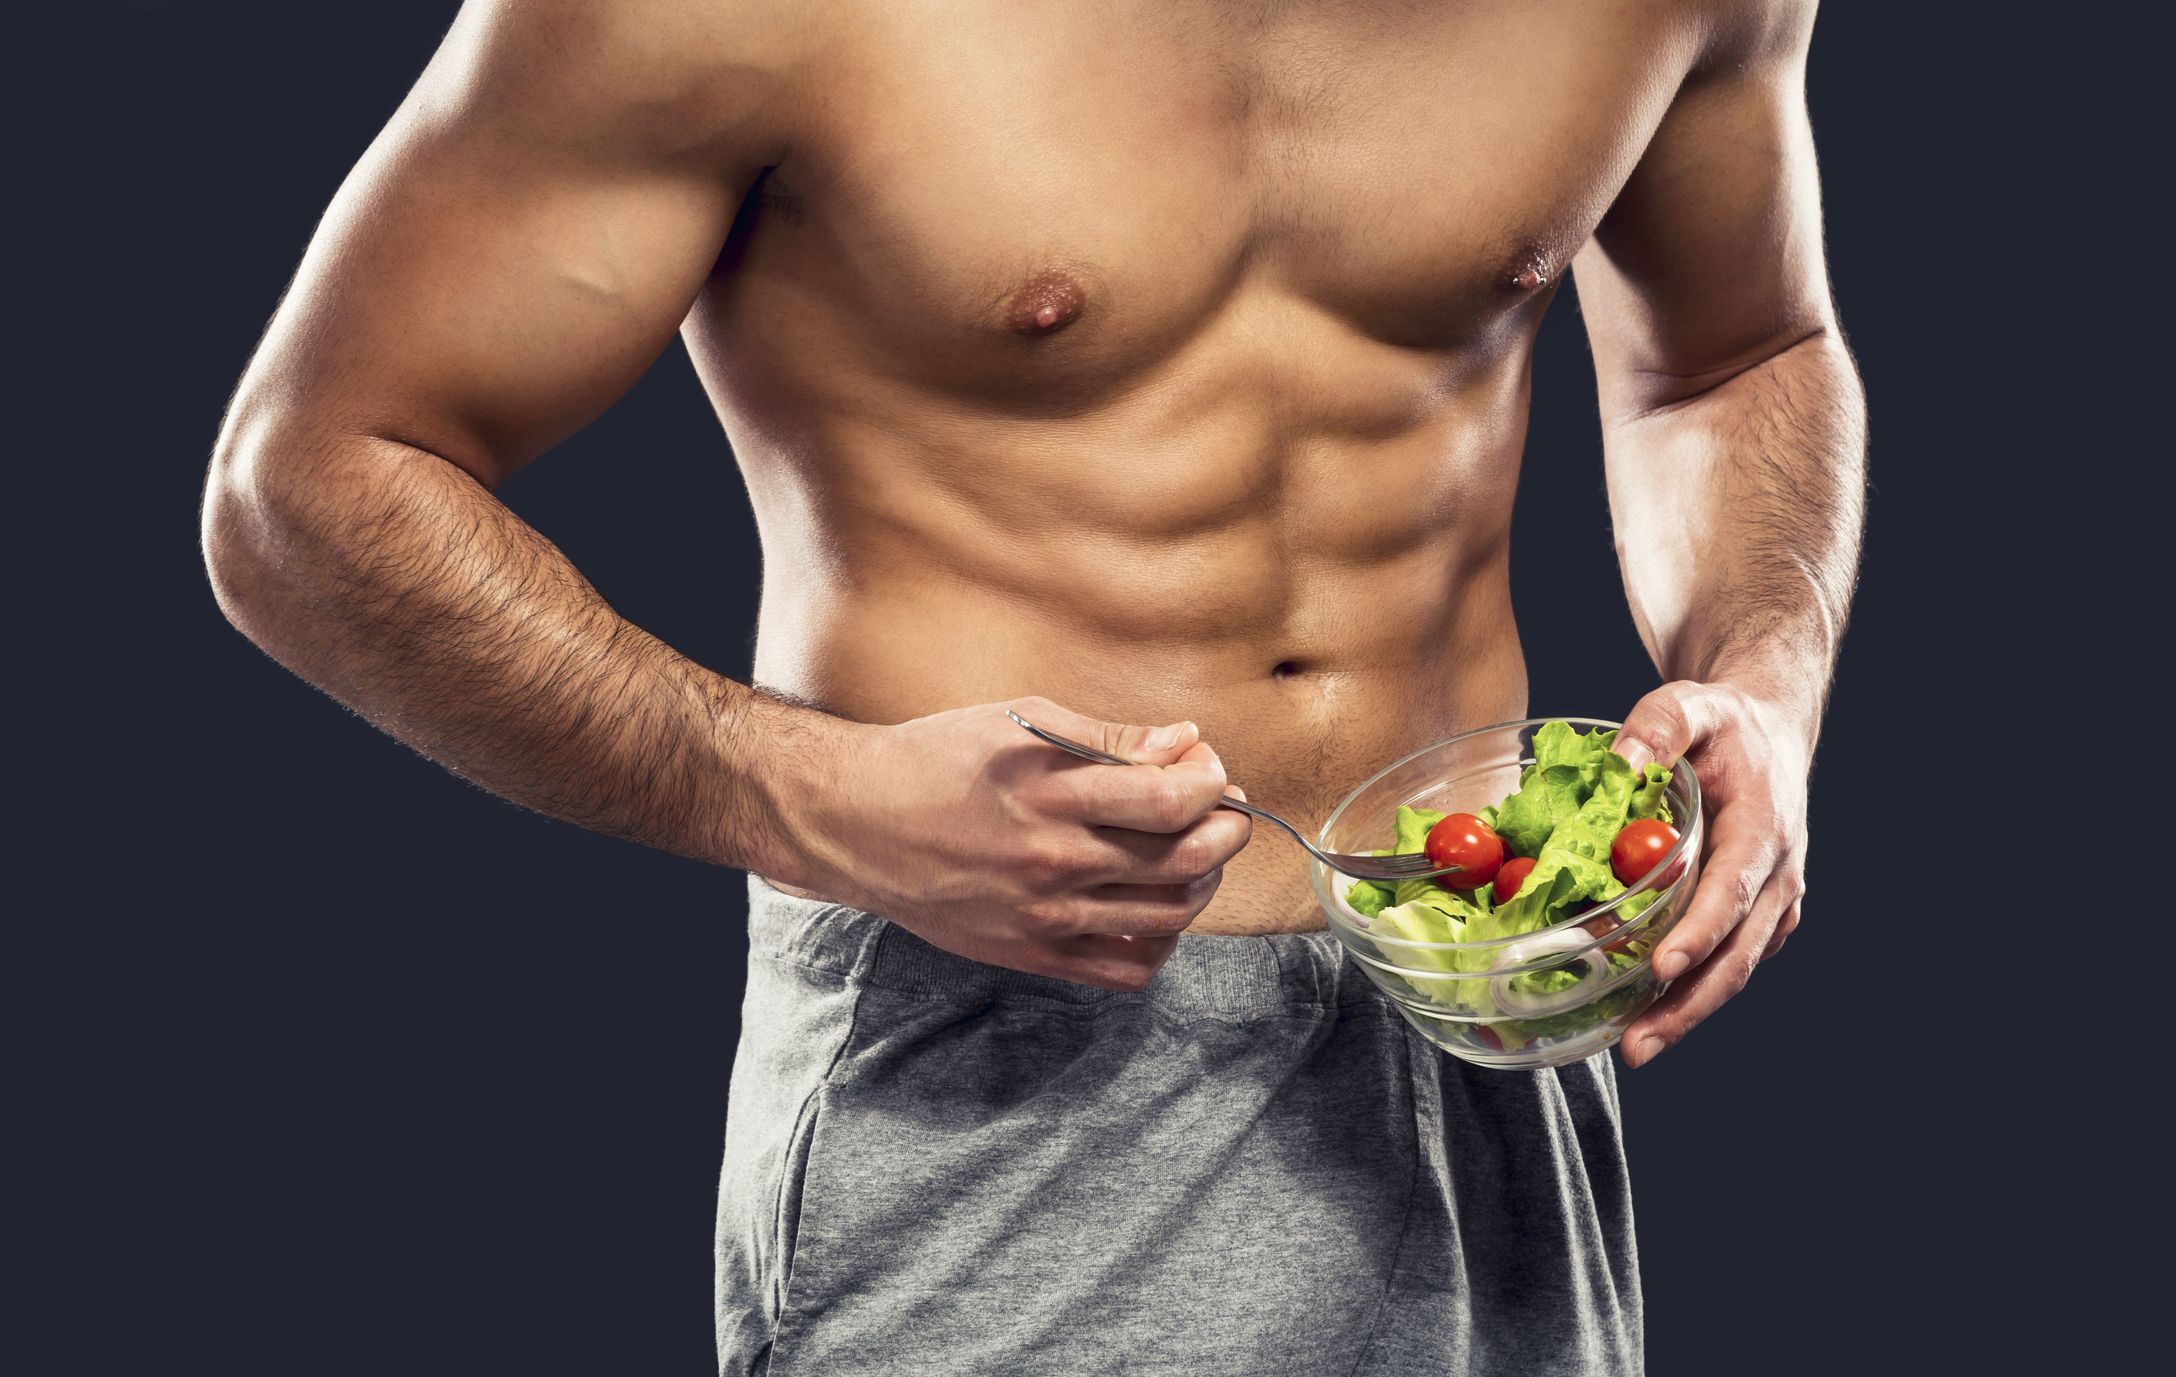 How To Get Shredded, Lean Body Guide